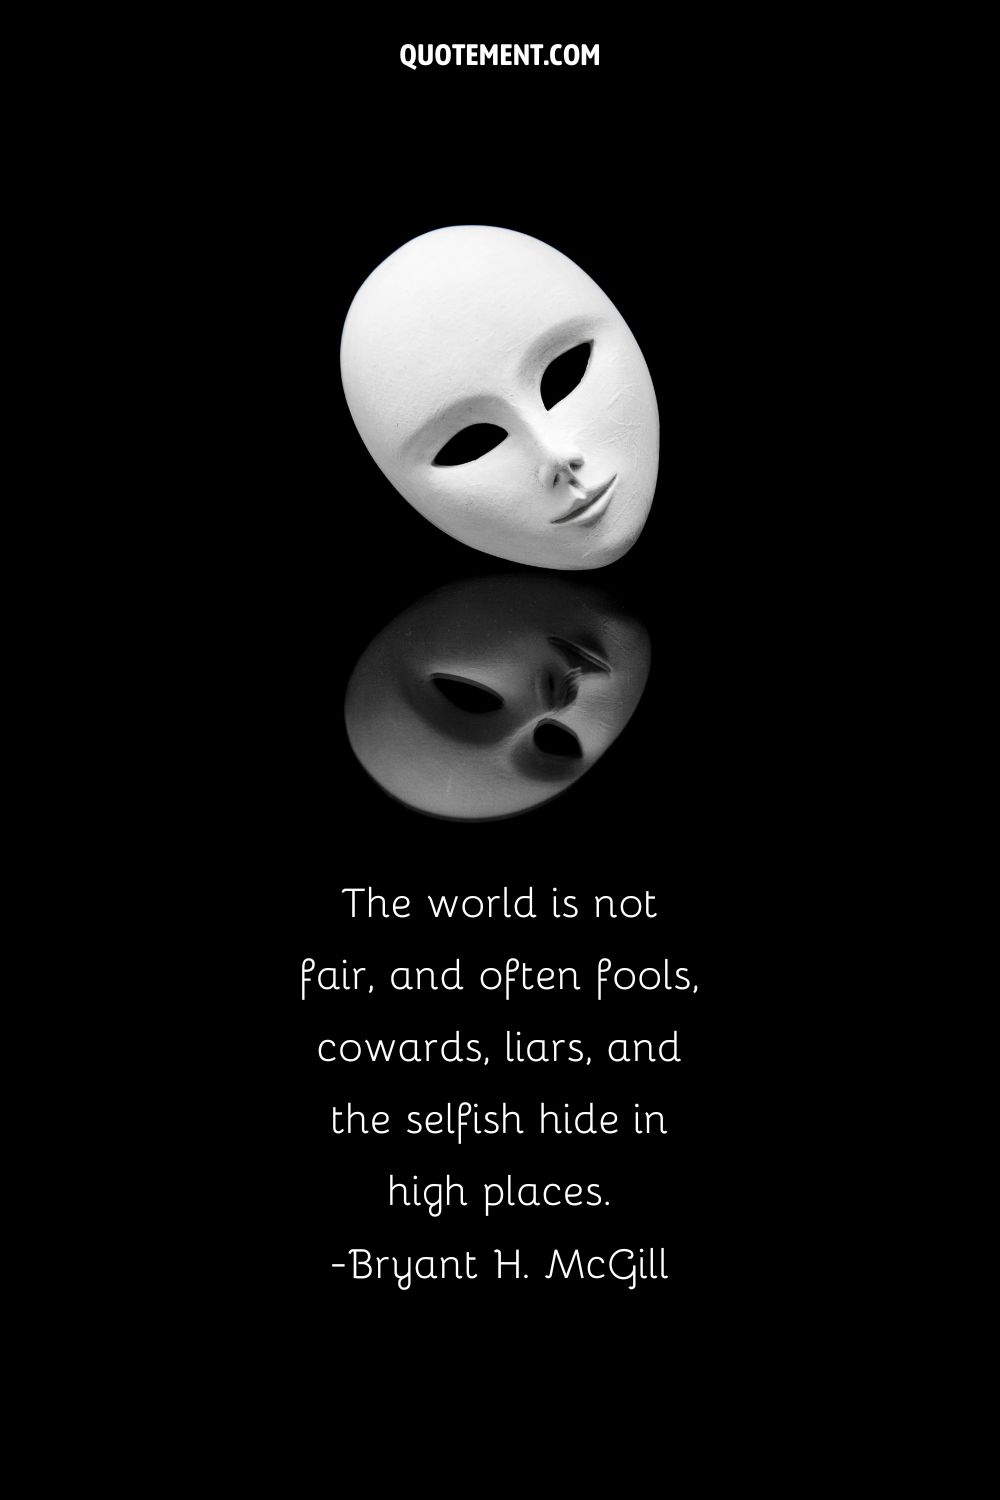 The world is not fair, and often fools, cowards, liars, and the selfish hide in high places